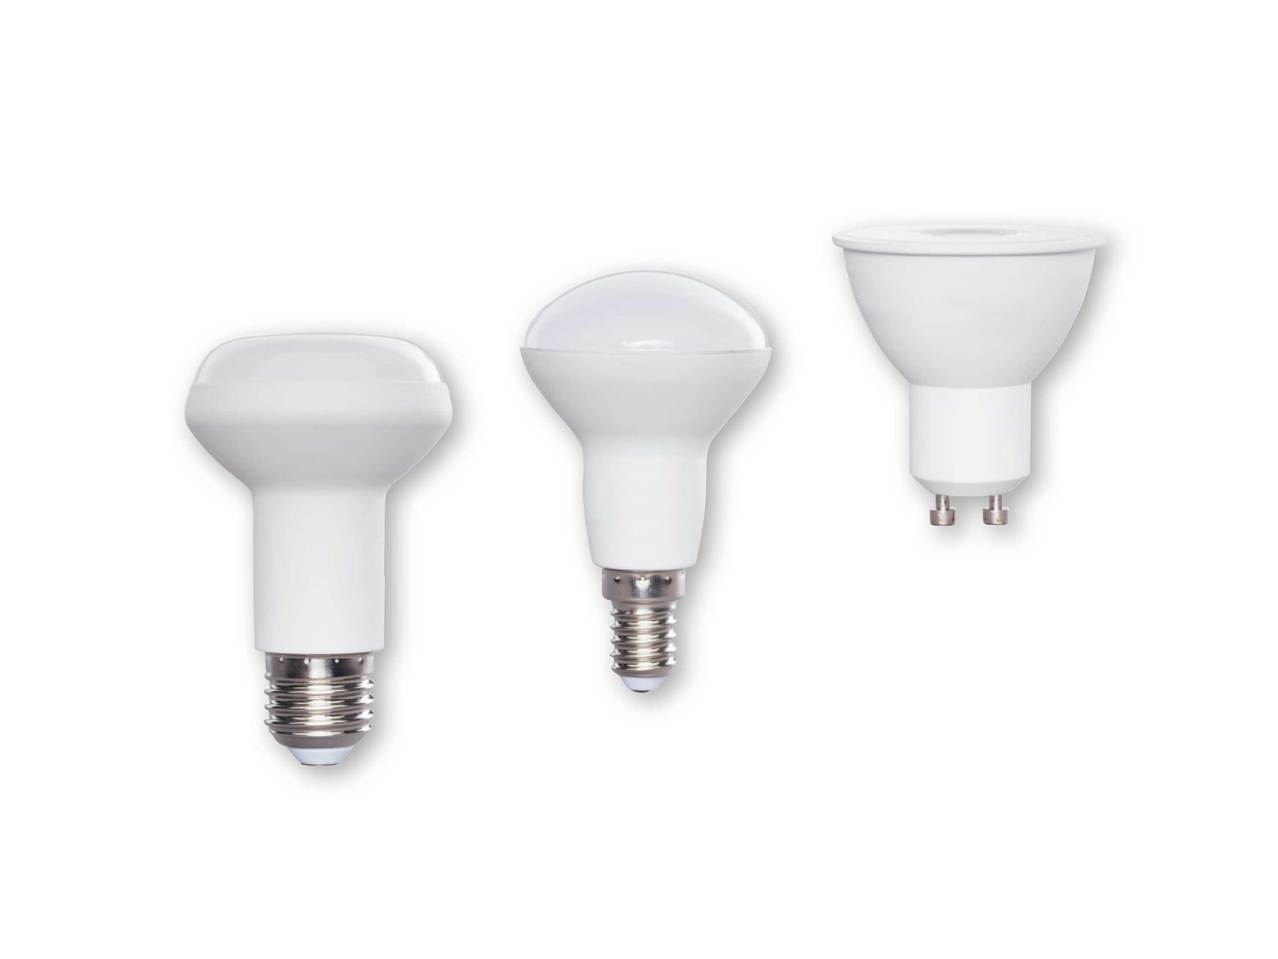 livarNo lux LED Dimmable Reflector Light Bulb